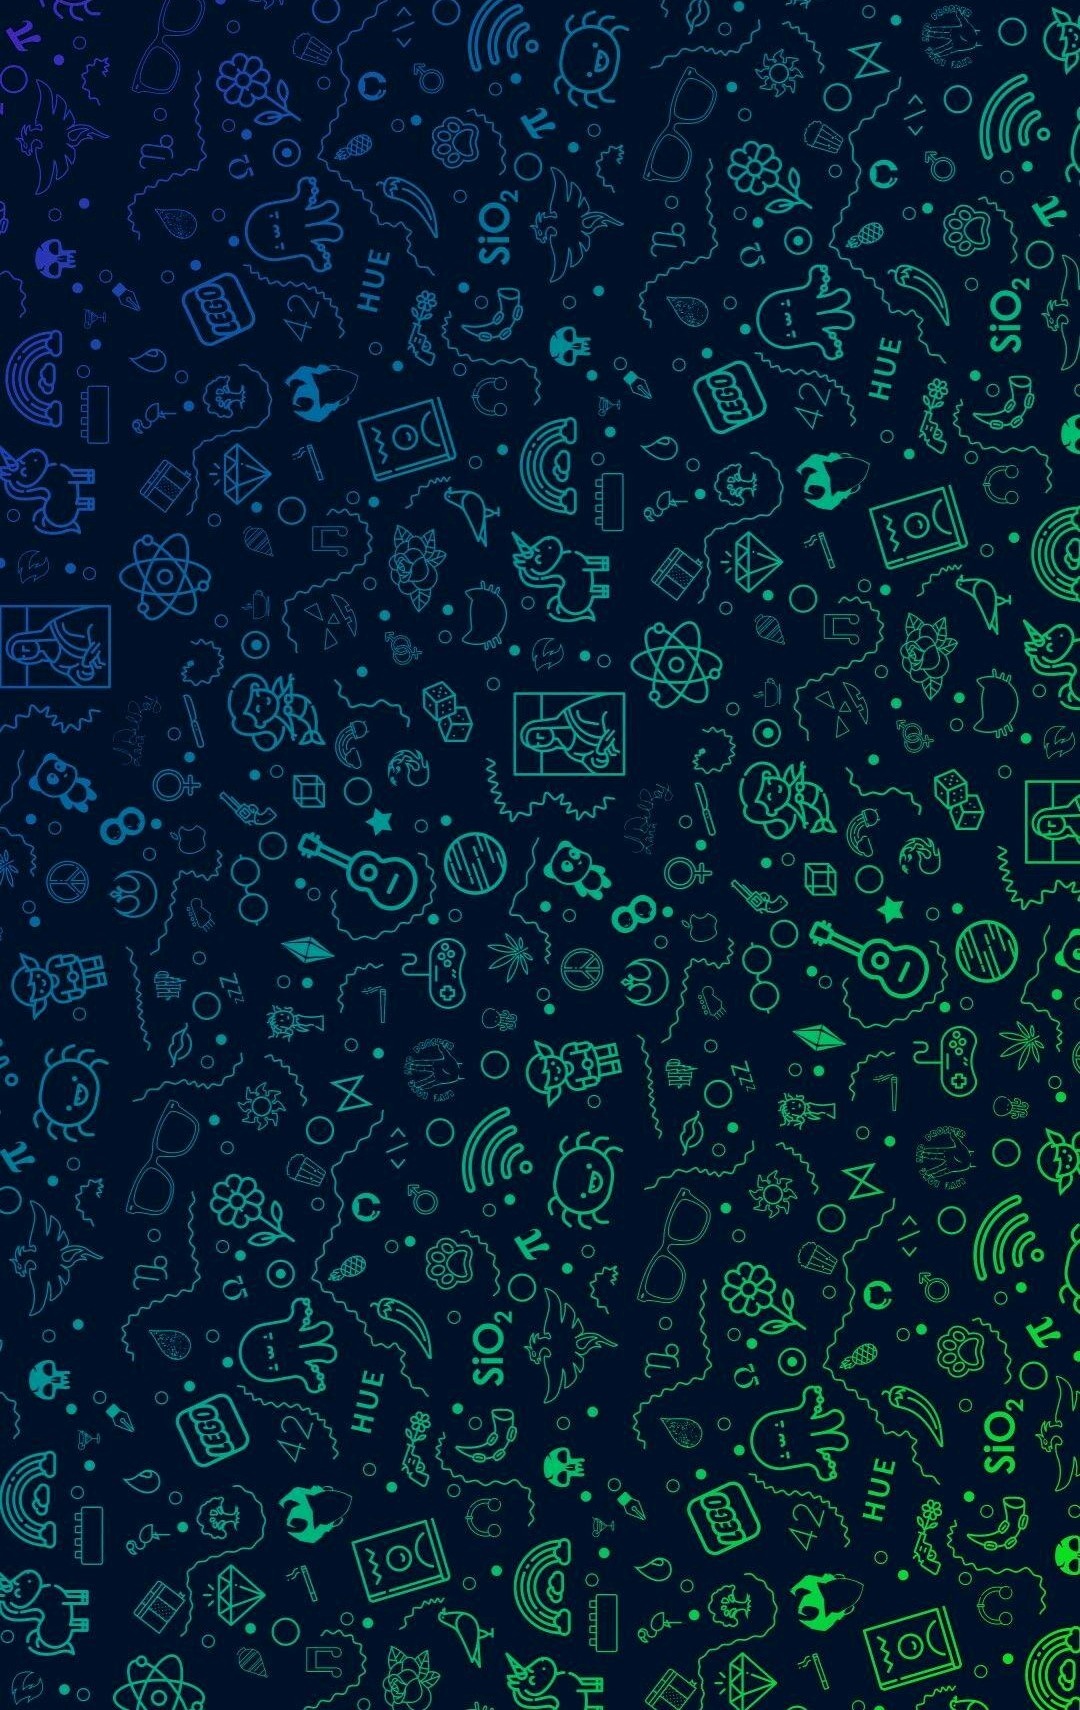 What should be the perfect wallpaper for WhatsApp?